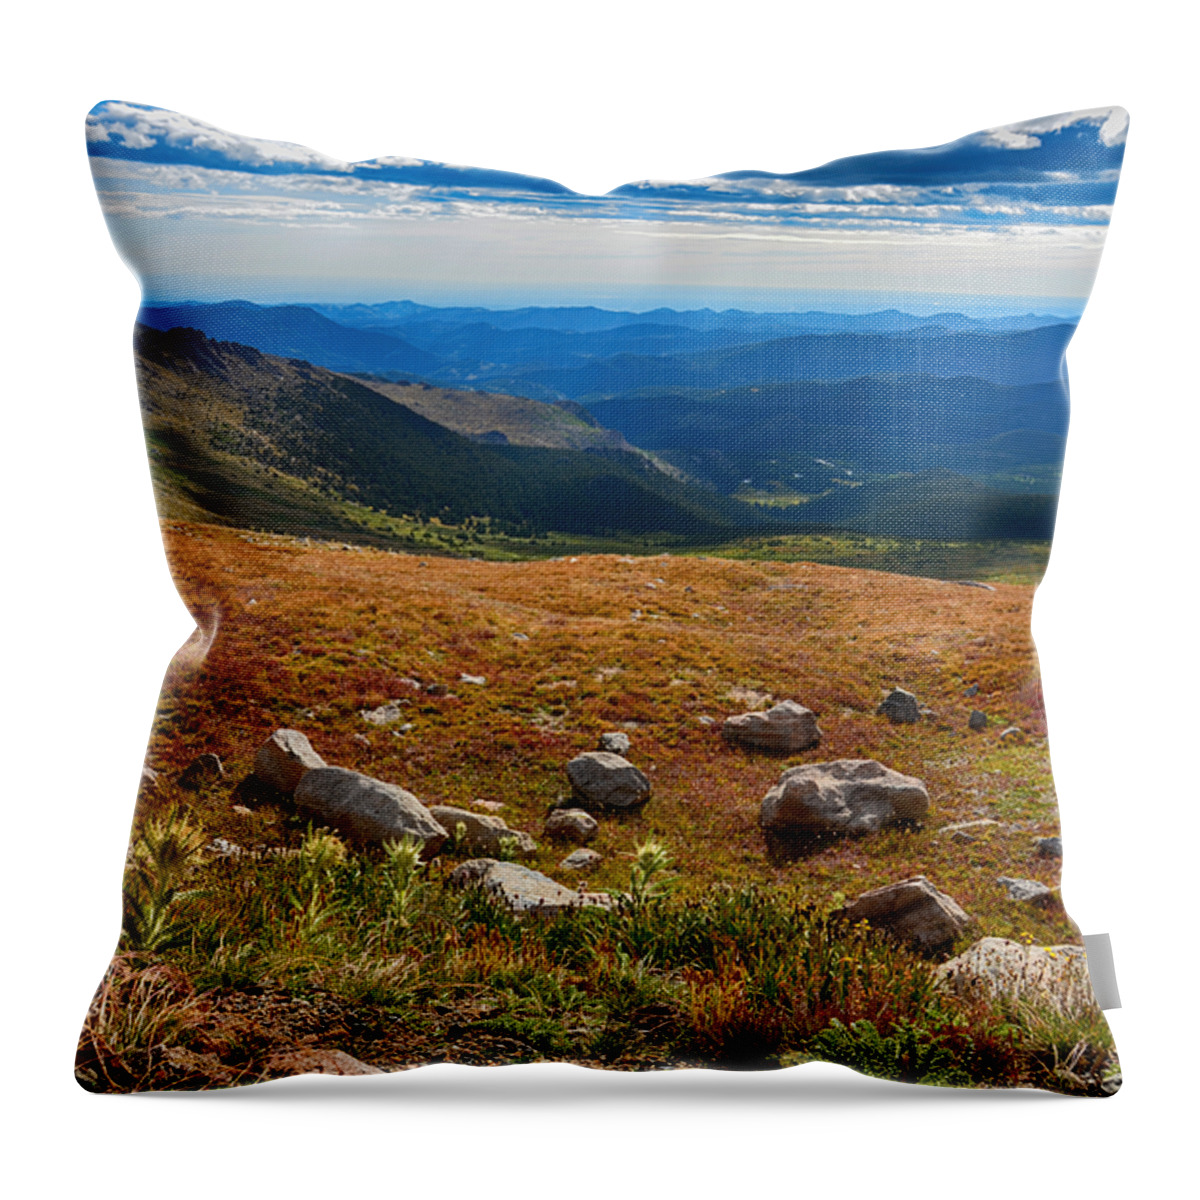 Mount Evans Throw Pillow featuring the mixed media Mount Evans Tundra by Angelina Tamez